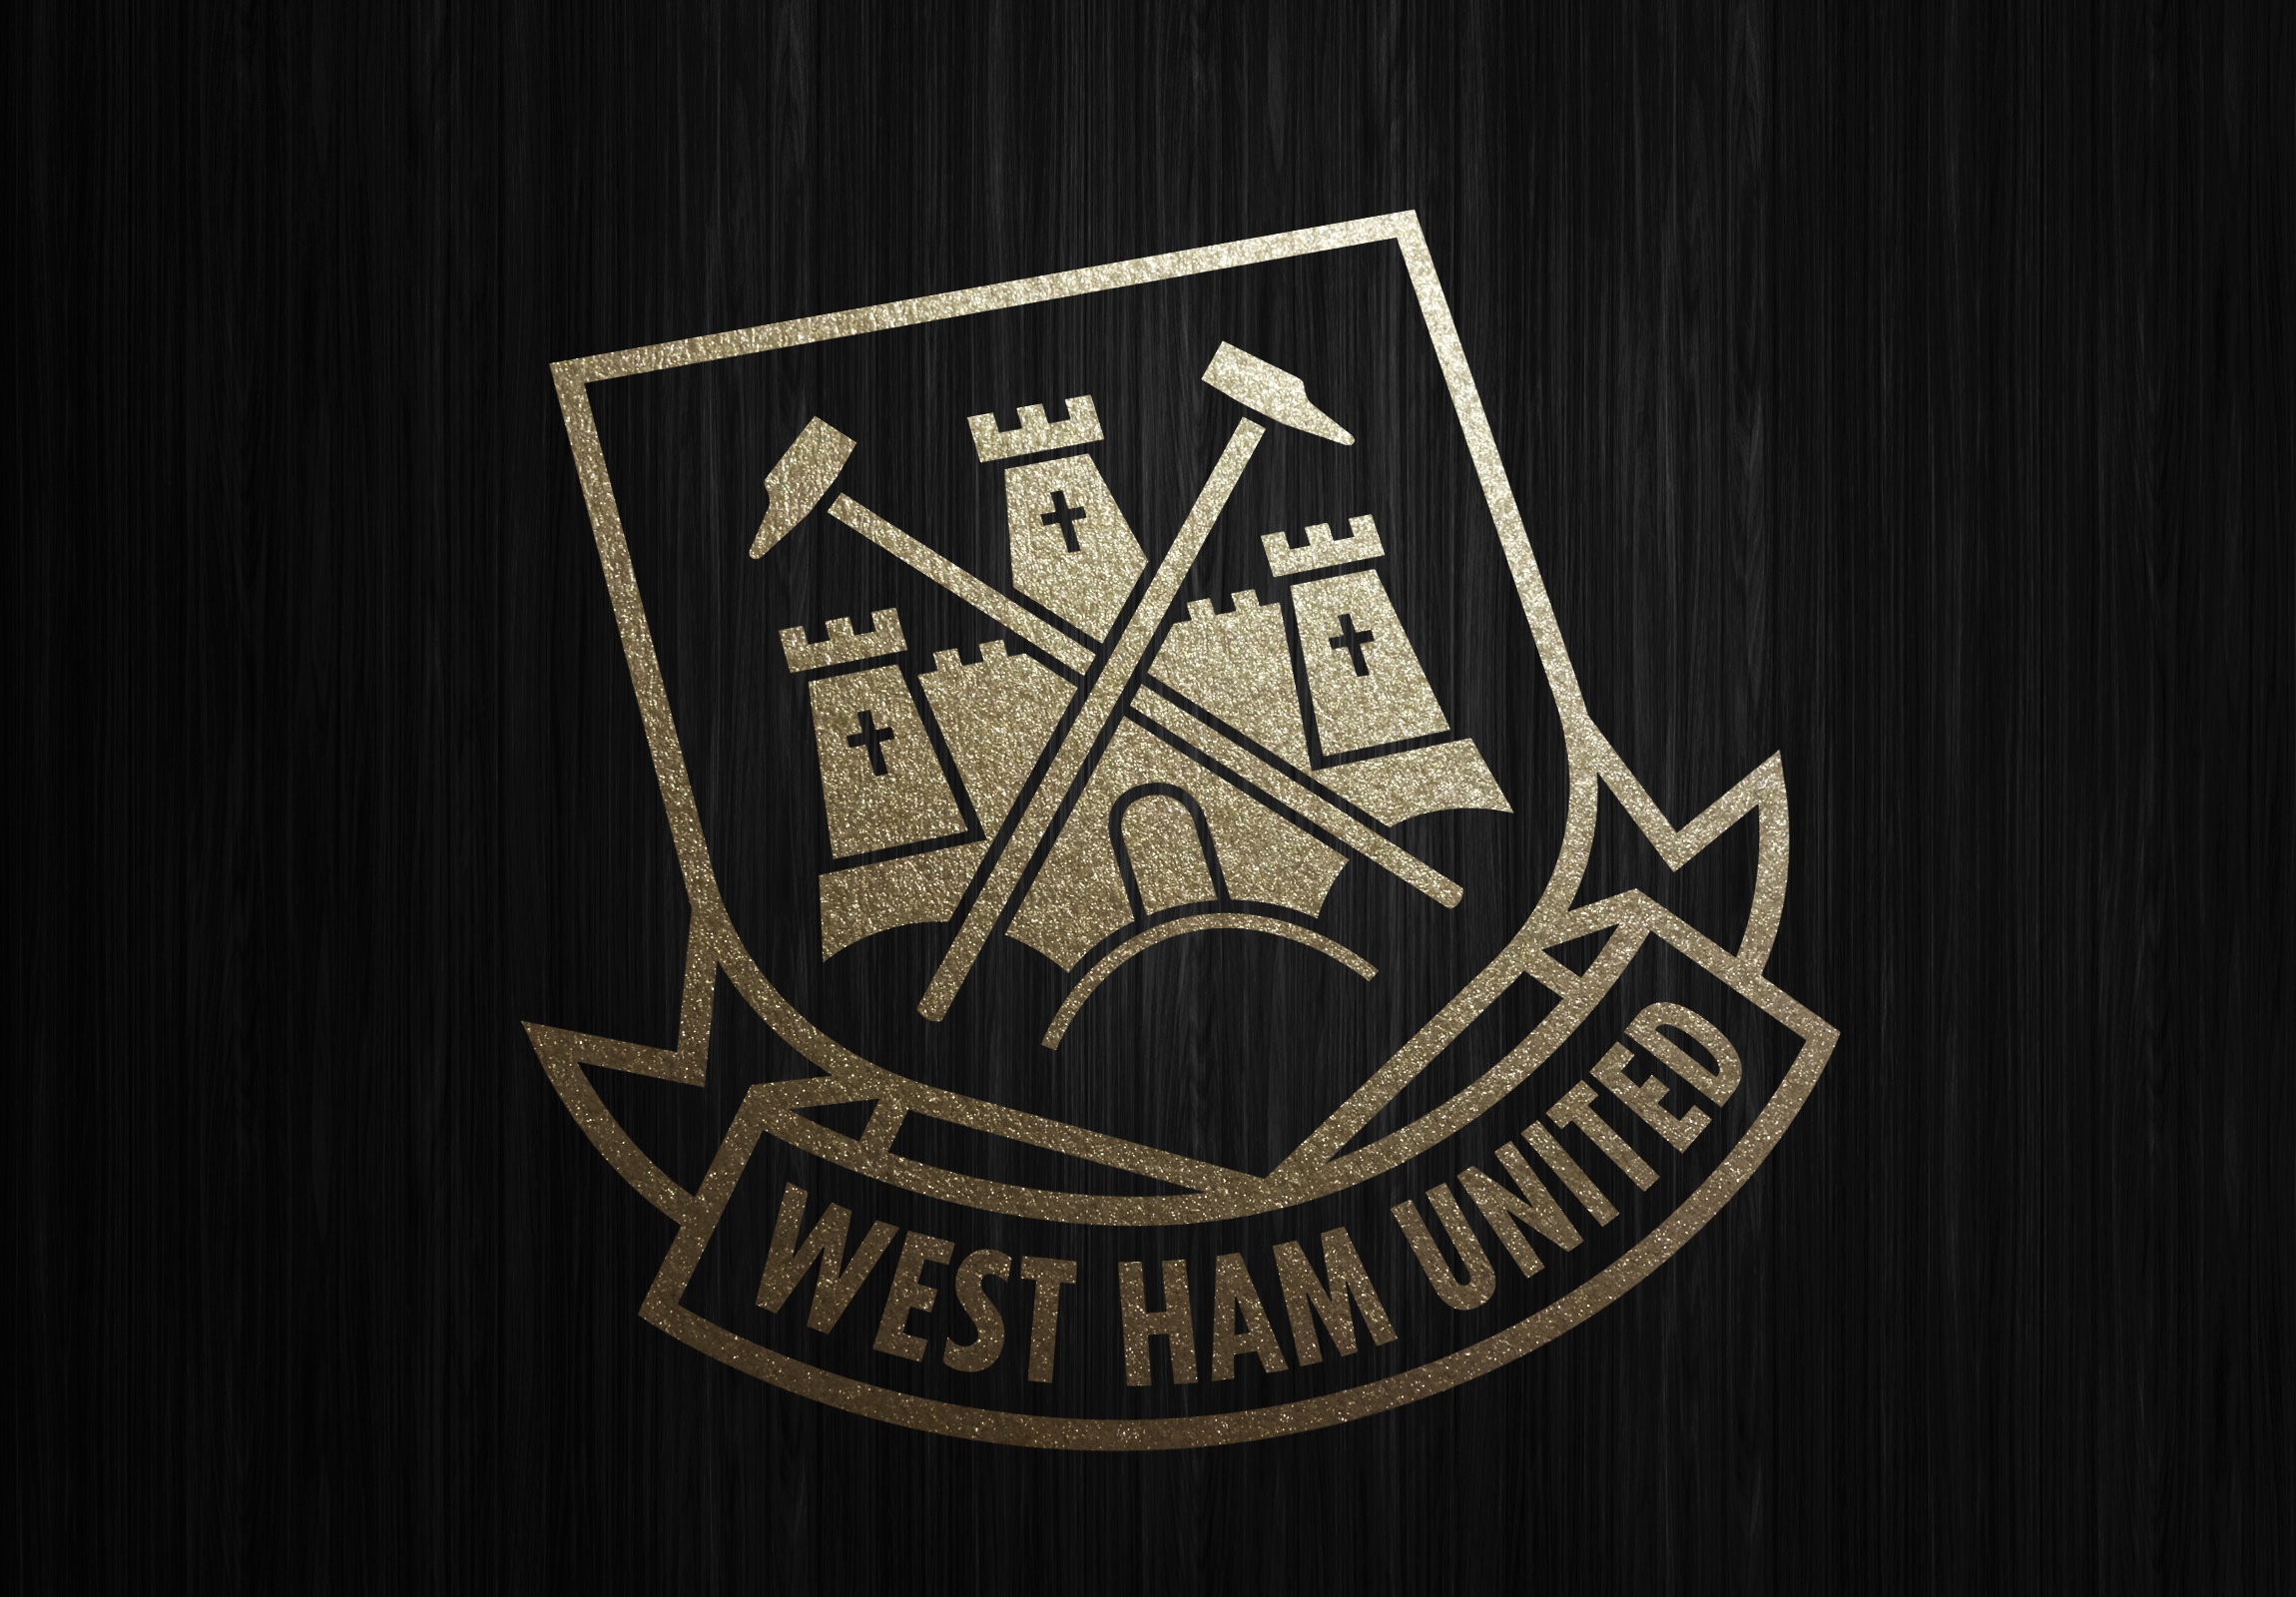 West Ham iPhone Wallpaper, Best 47 West Ham United Wallpaper On Hipwallpaper Old West Wallpaper Wally West Wallpaper And Old West Pistol Wallpaper / Hammers consulting fans on design of new club